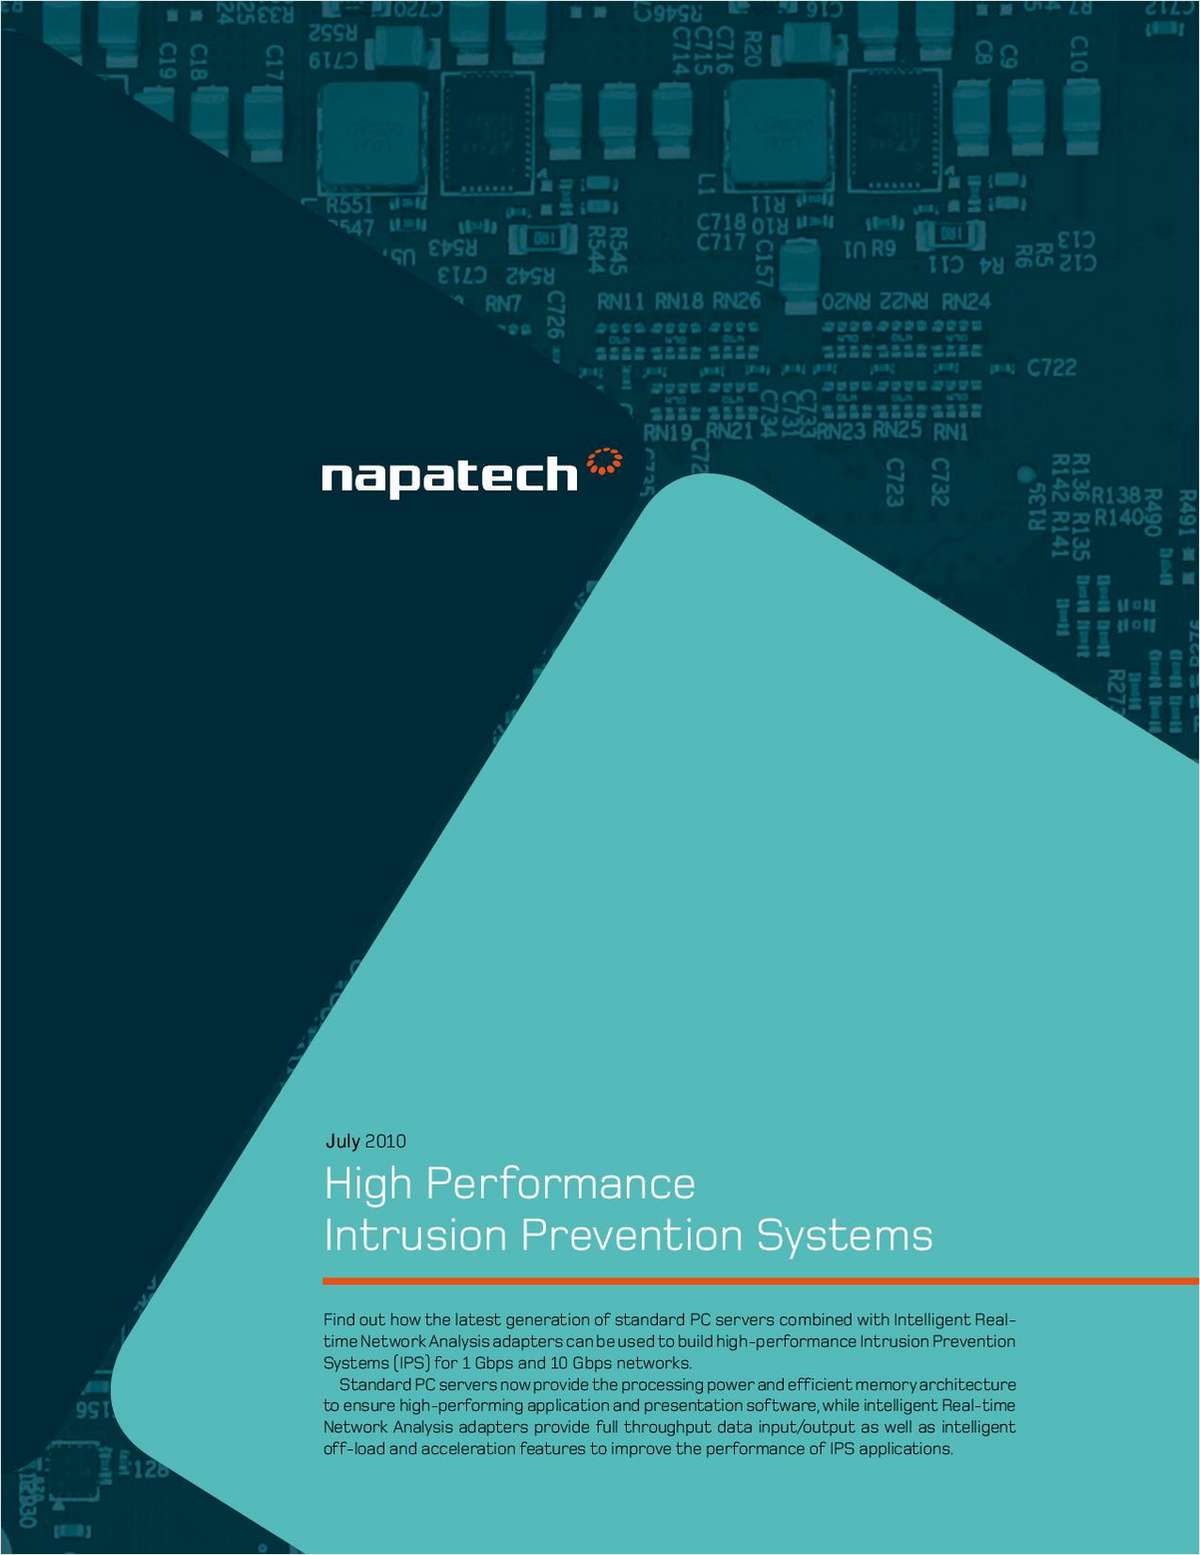 High Performance Intrusion Prevention Systems for Network Security Vendors